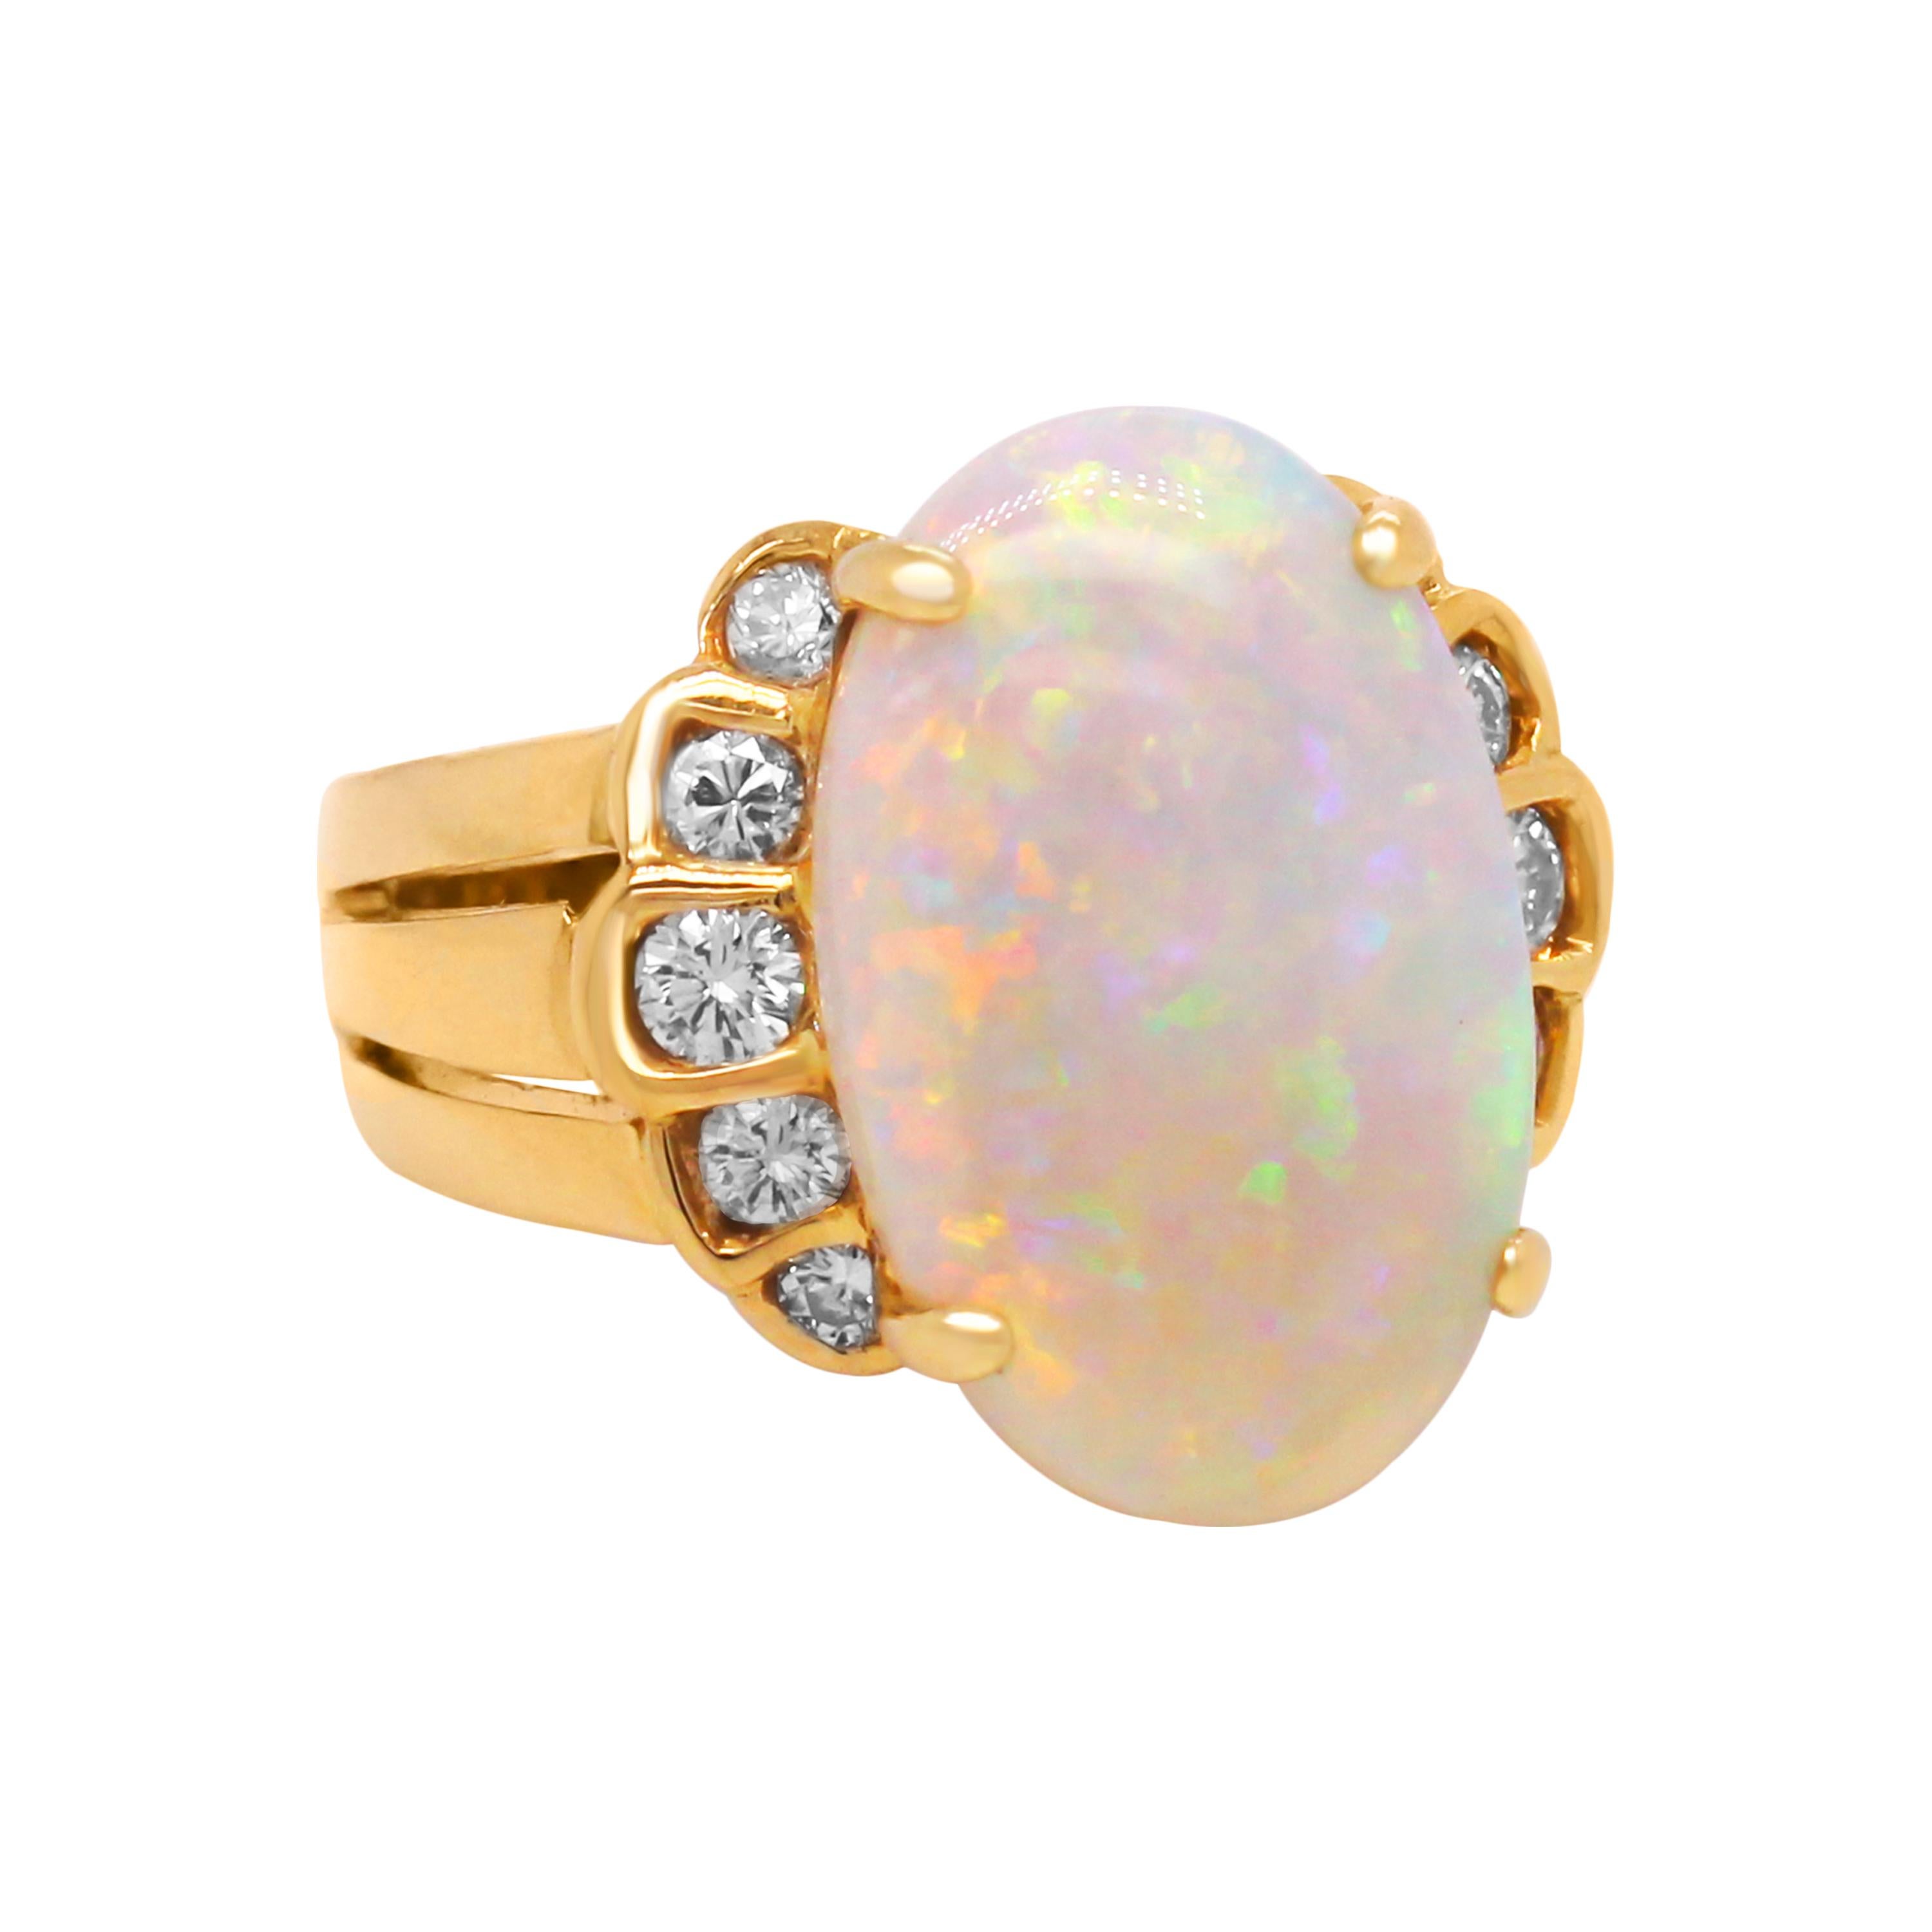 18k Yellow Gold and Diamond Cocktail Ring with Oval Ethiopian Opal Center

One-of-a-kind ring featuring an Opal center with incredible color and quality. 

0.40 carat G color, VS clarity diamonds

7.00 carat Opal center. Opal is an oval-cut and from